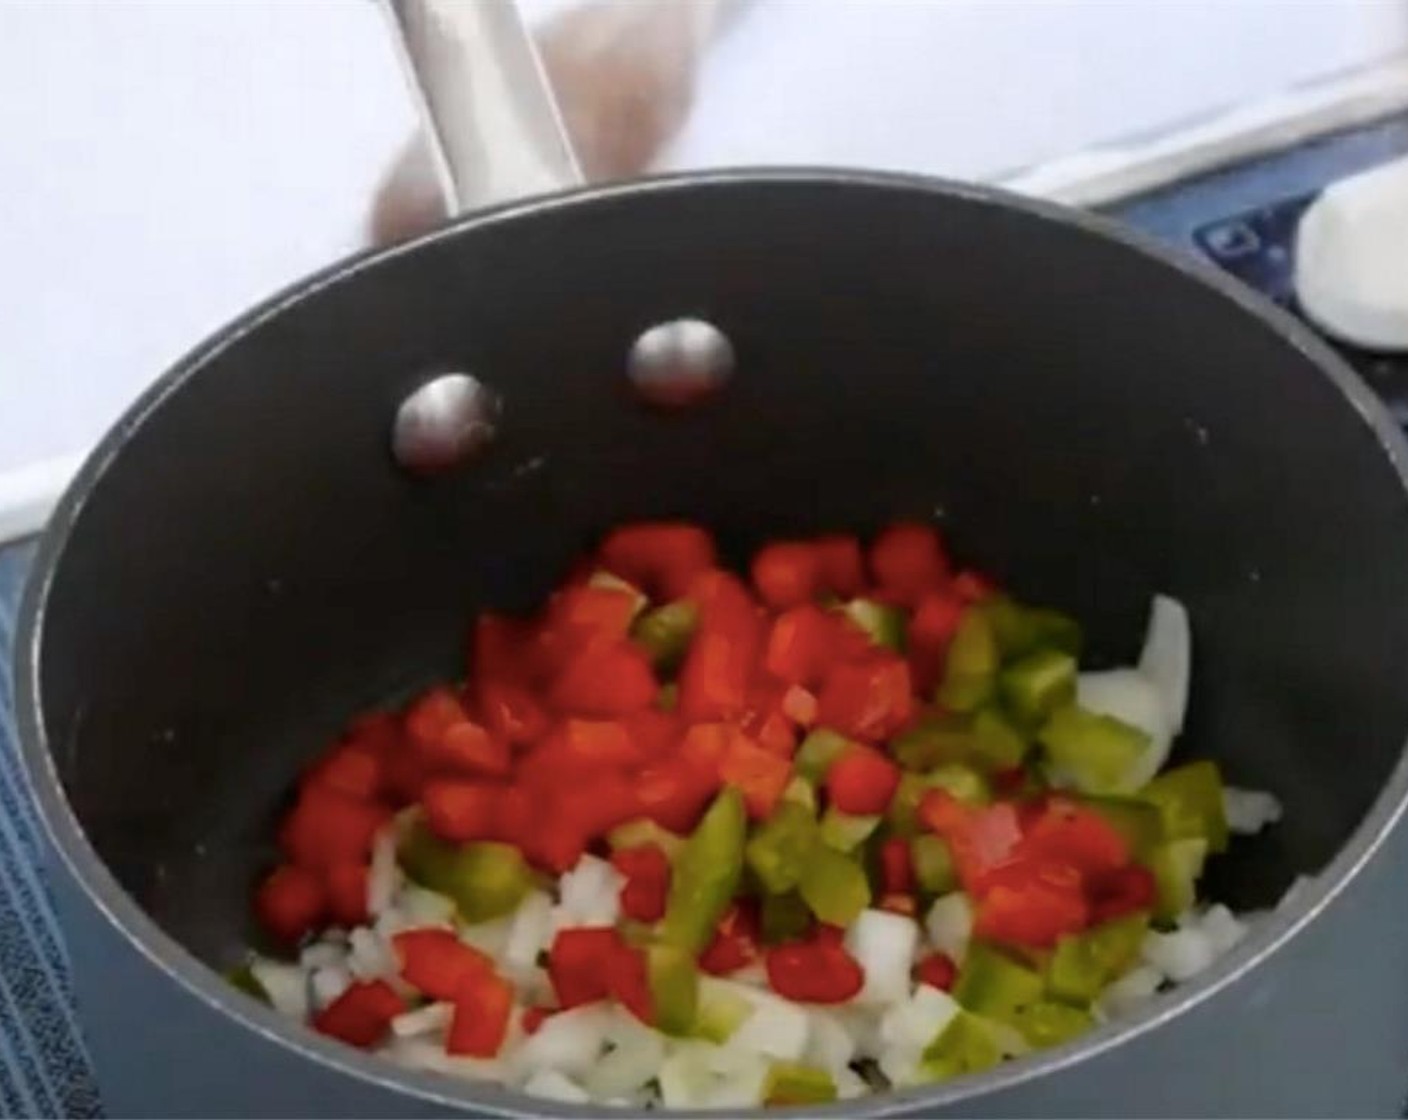 step 1 Dice the Onion (1/2), Garlic (2 cloves), Green Bell Pepper (1/4), and Red Chili Pepper (1/4). In a pan, sweat them for about 10 mins until soft.